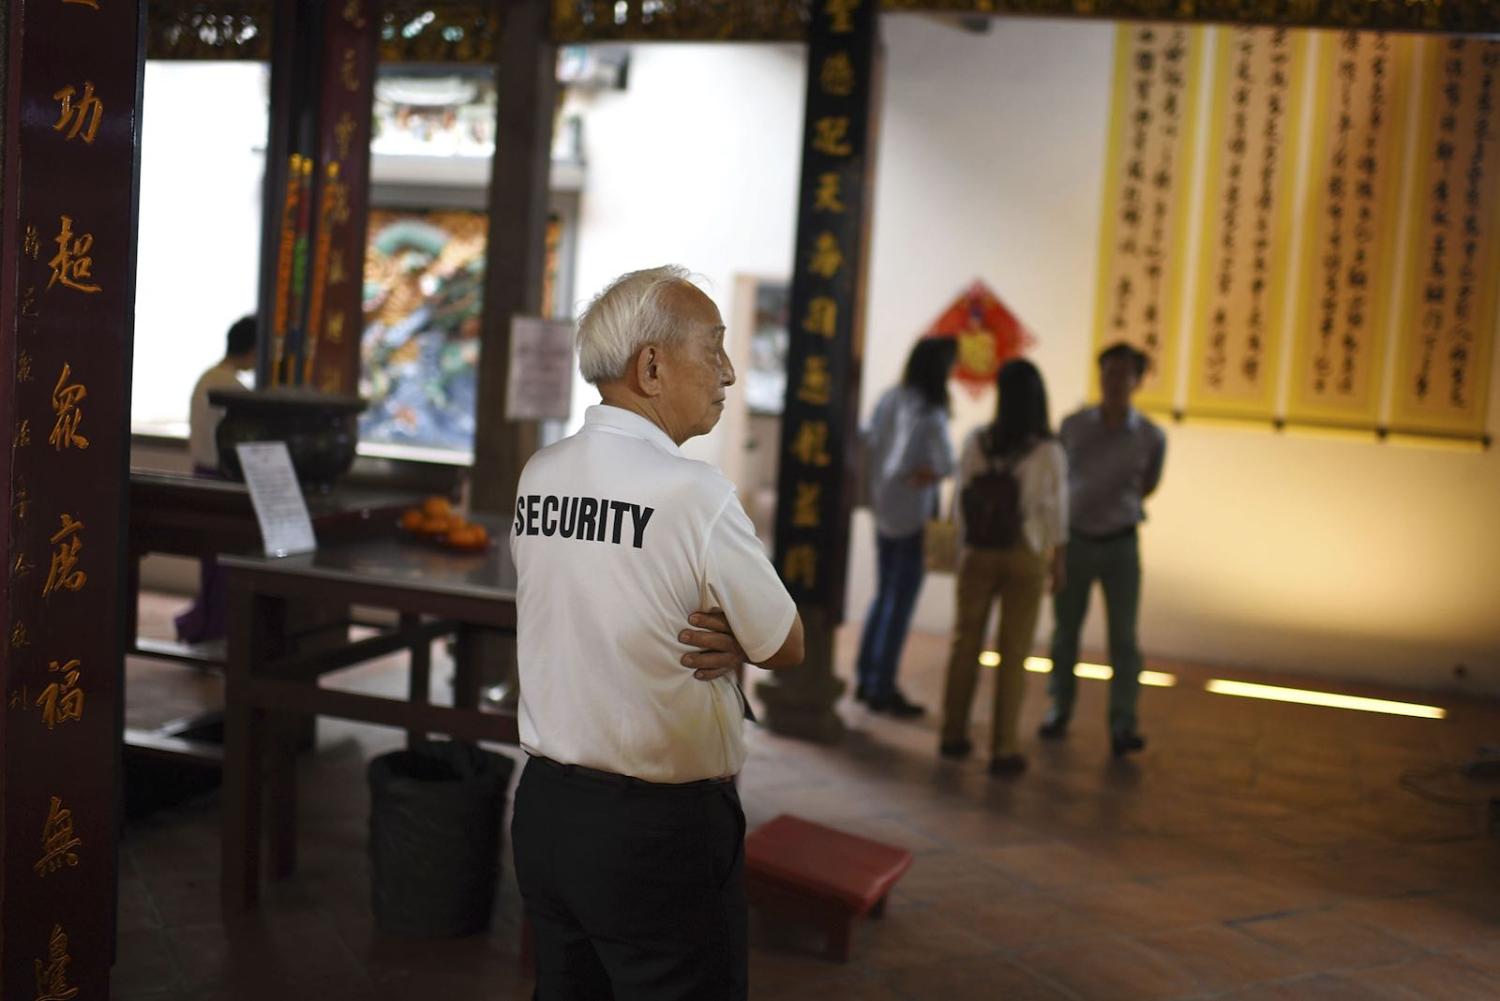 Wong, a 72-year-old security guard, keeps watch at temple during the Chinese New Year in Singapore, February 2016. (Borja Sanchez-Trillo/Getty Images)